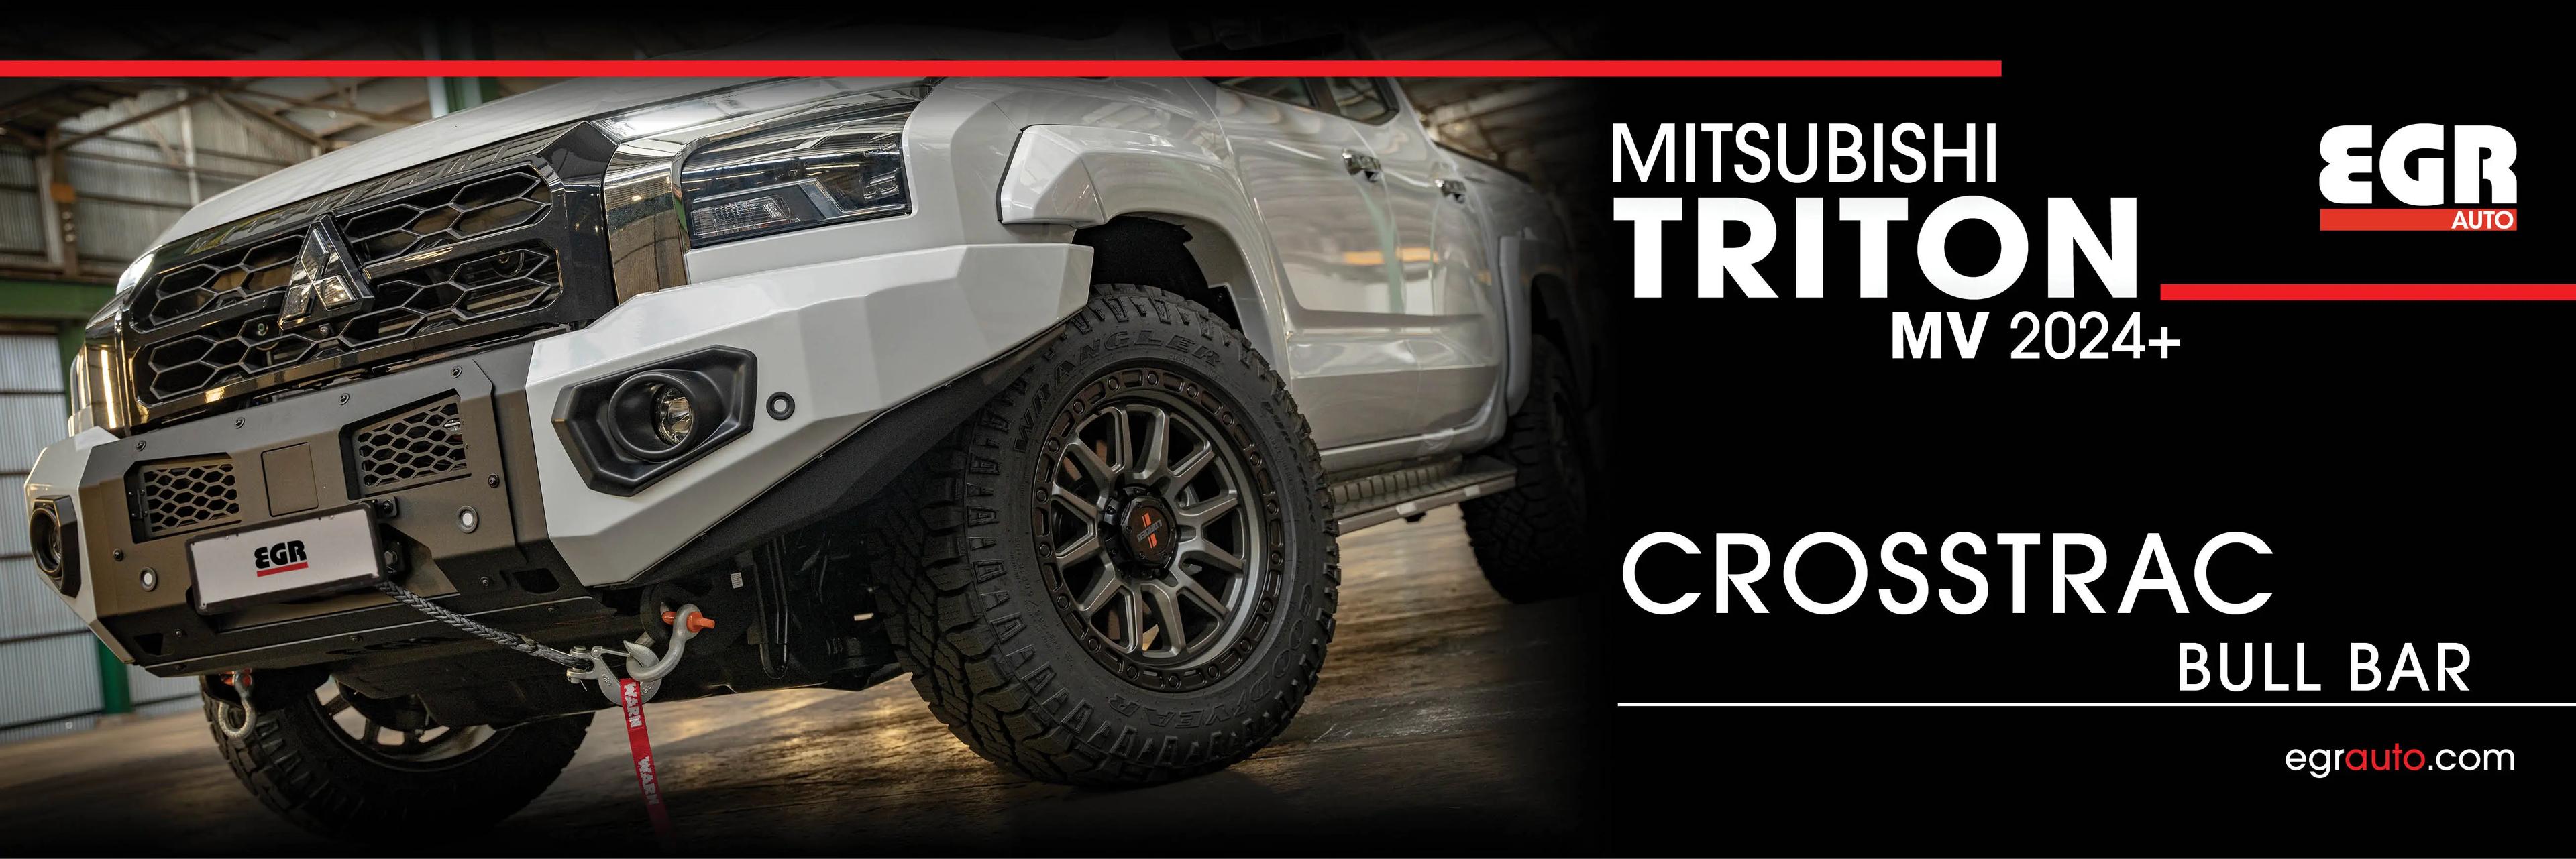 Promo banner - Click here for new EGR Crosstrac Bull Bar available now for the Mitsubishi Triton MV 2024.